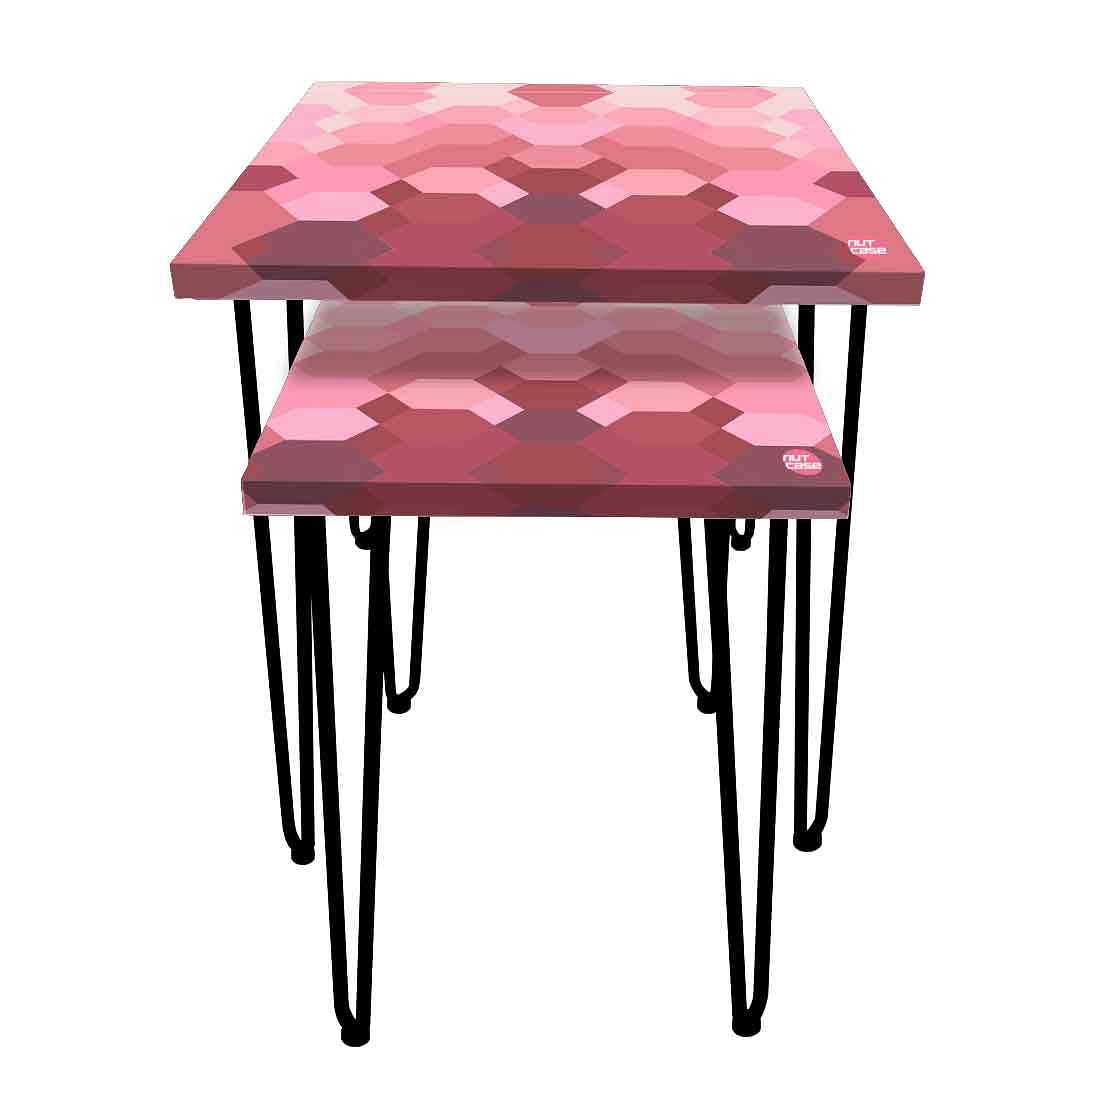 Nesting Tables Set of 2 for Living Room Decor - Hexagon Pink Nutcase